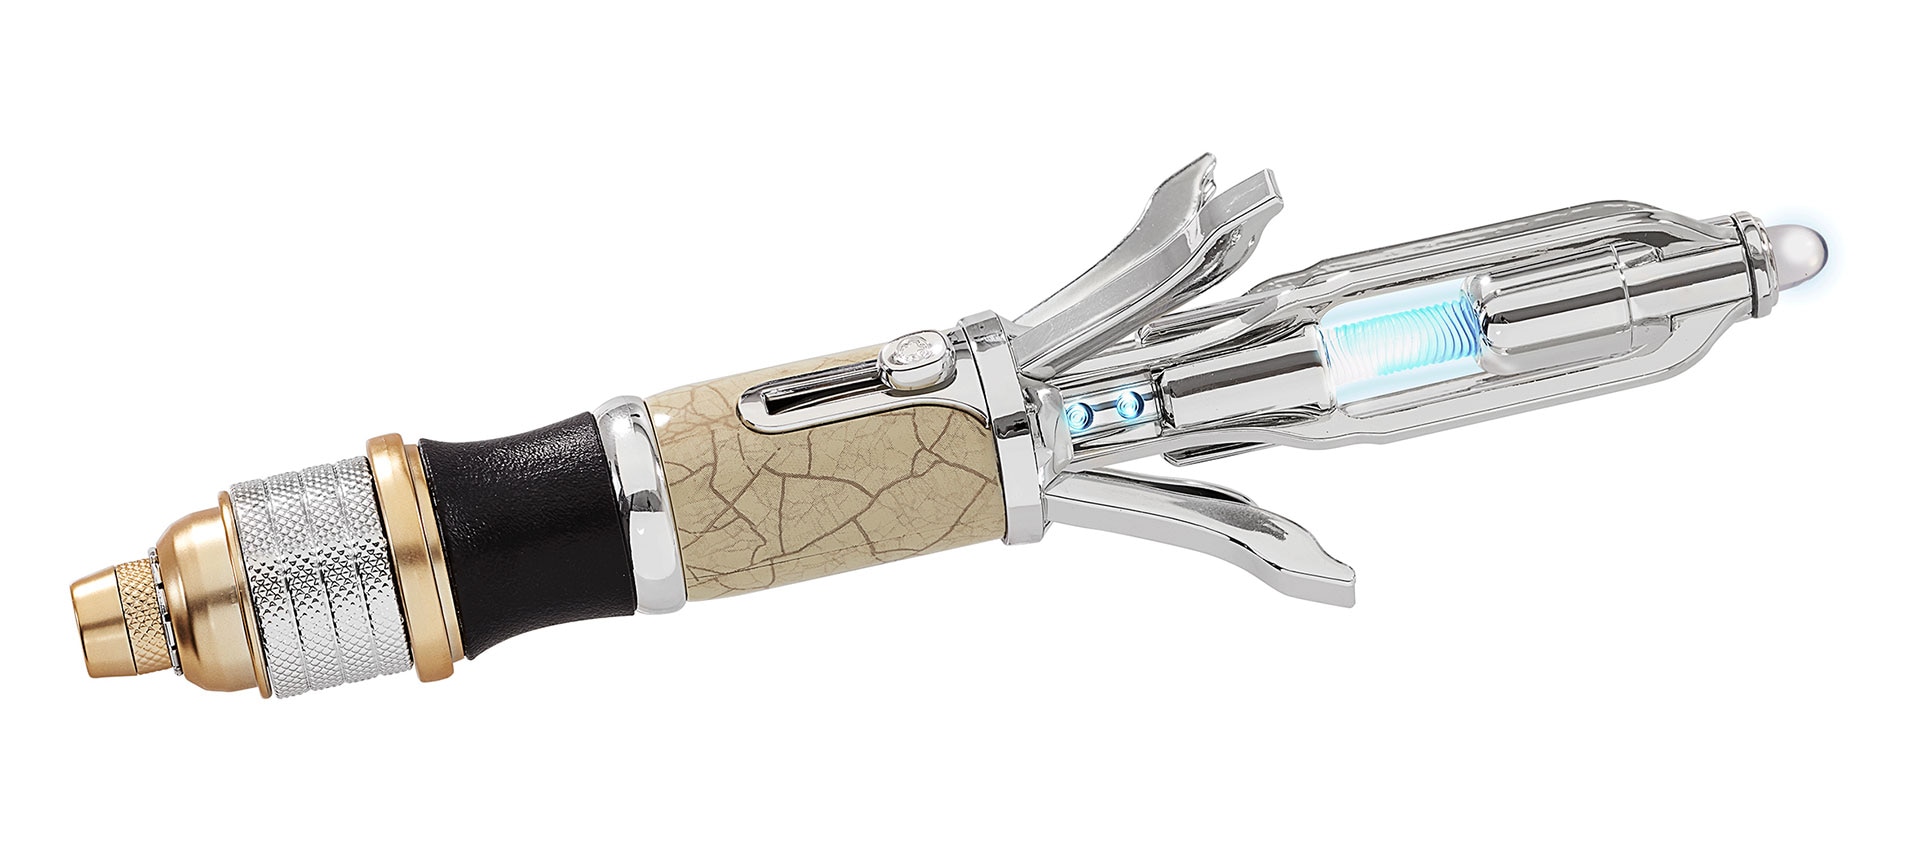 DOCTOR WHO 14th Doctor Sonic Screwdriver 